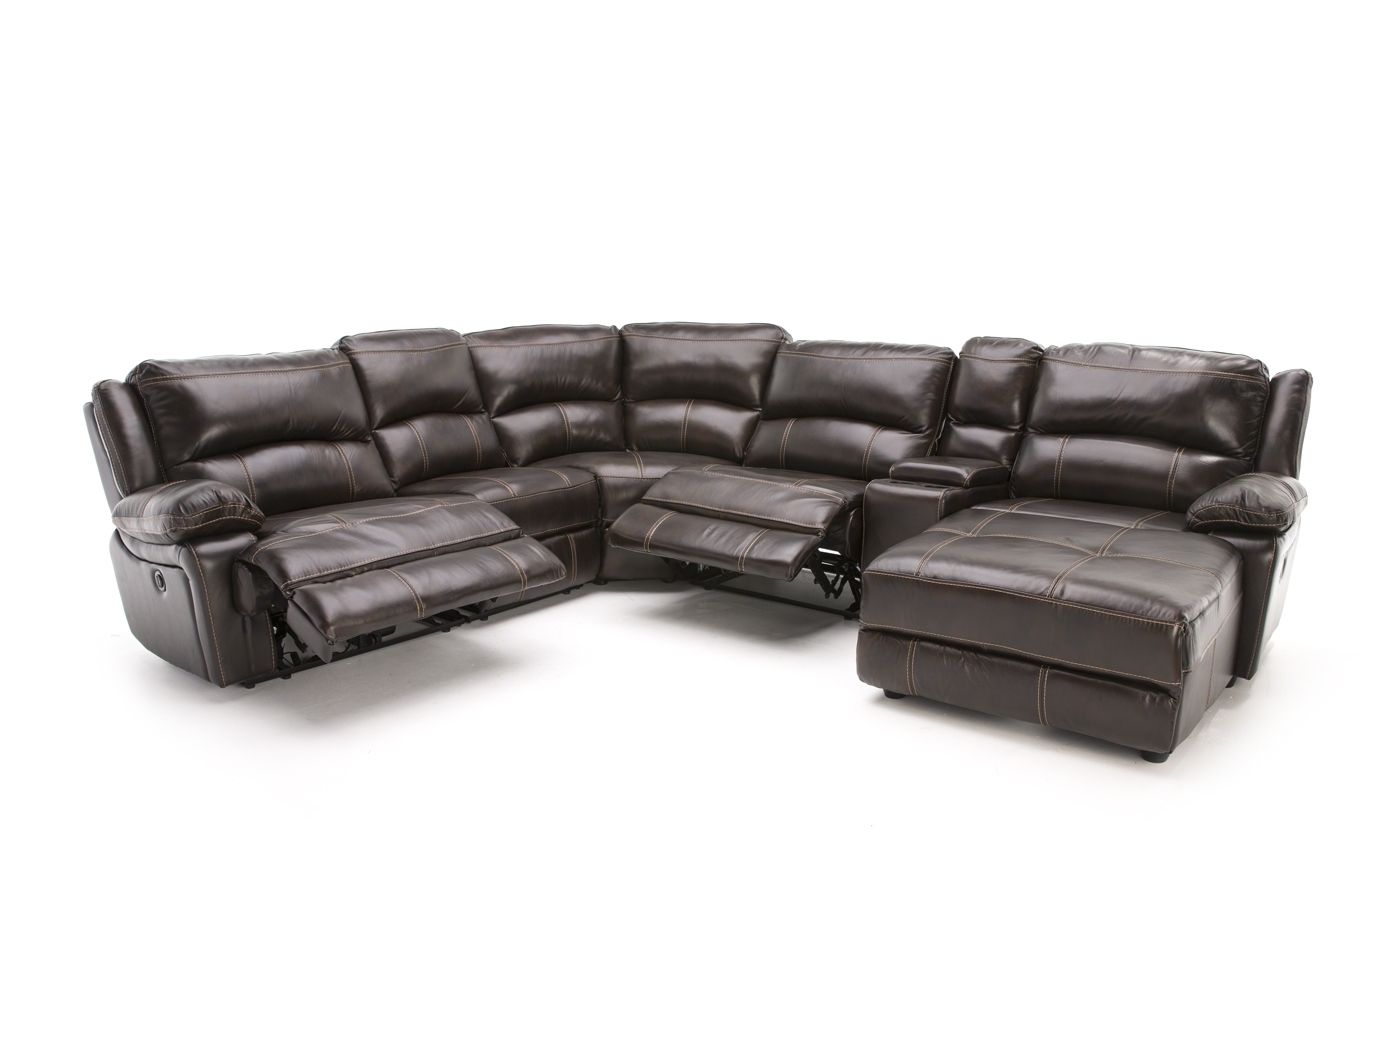 Living Room – Sectionals | Steinhafels Throughout Marissa Ii 3 Piece Sectionals (View 9 of 25)